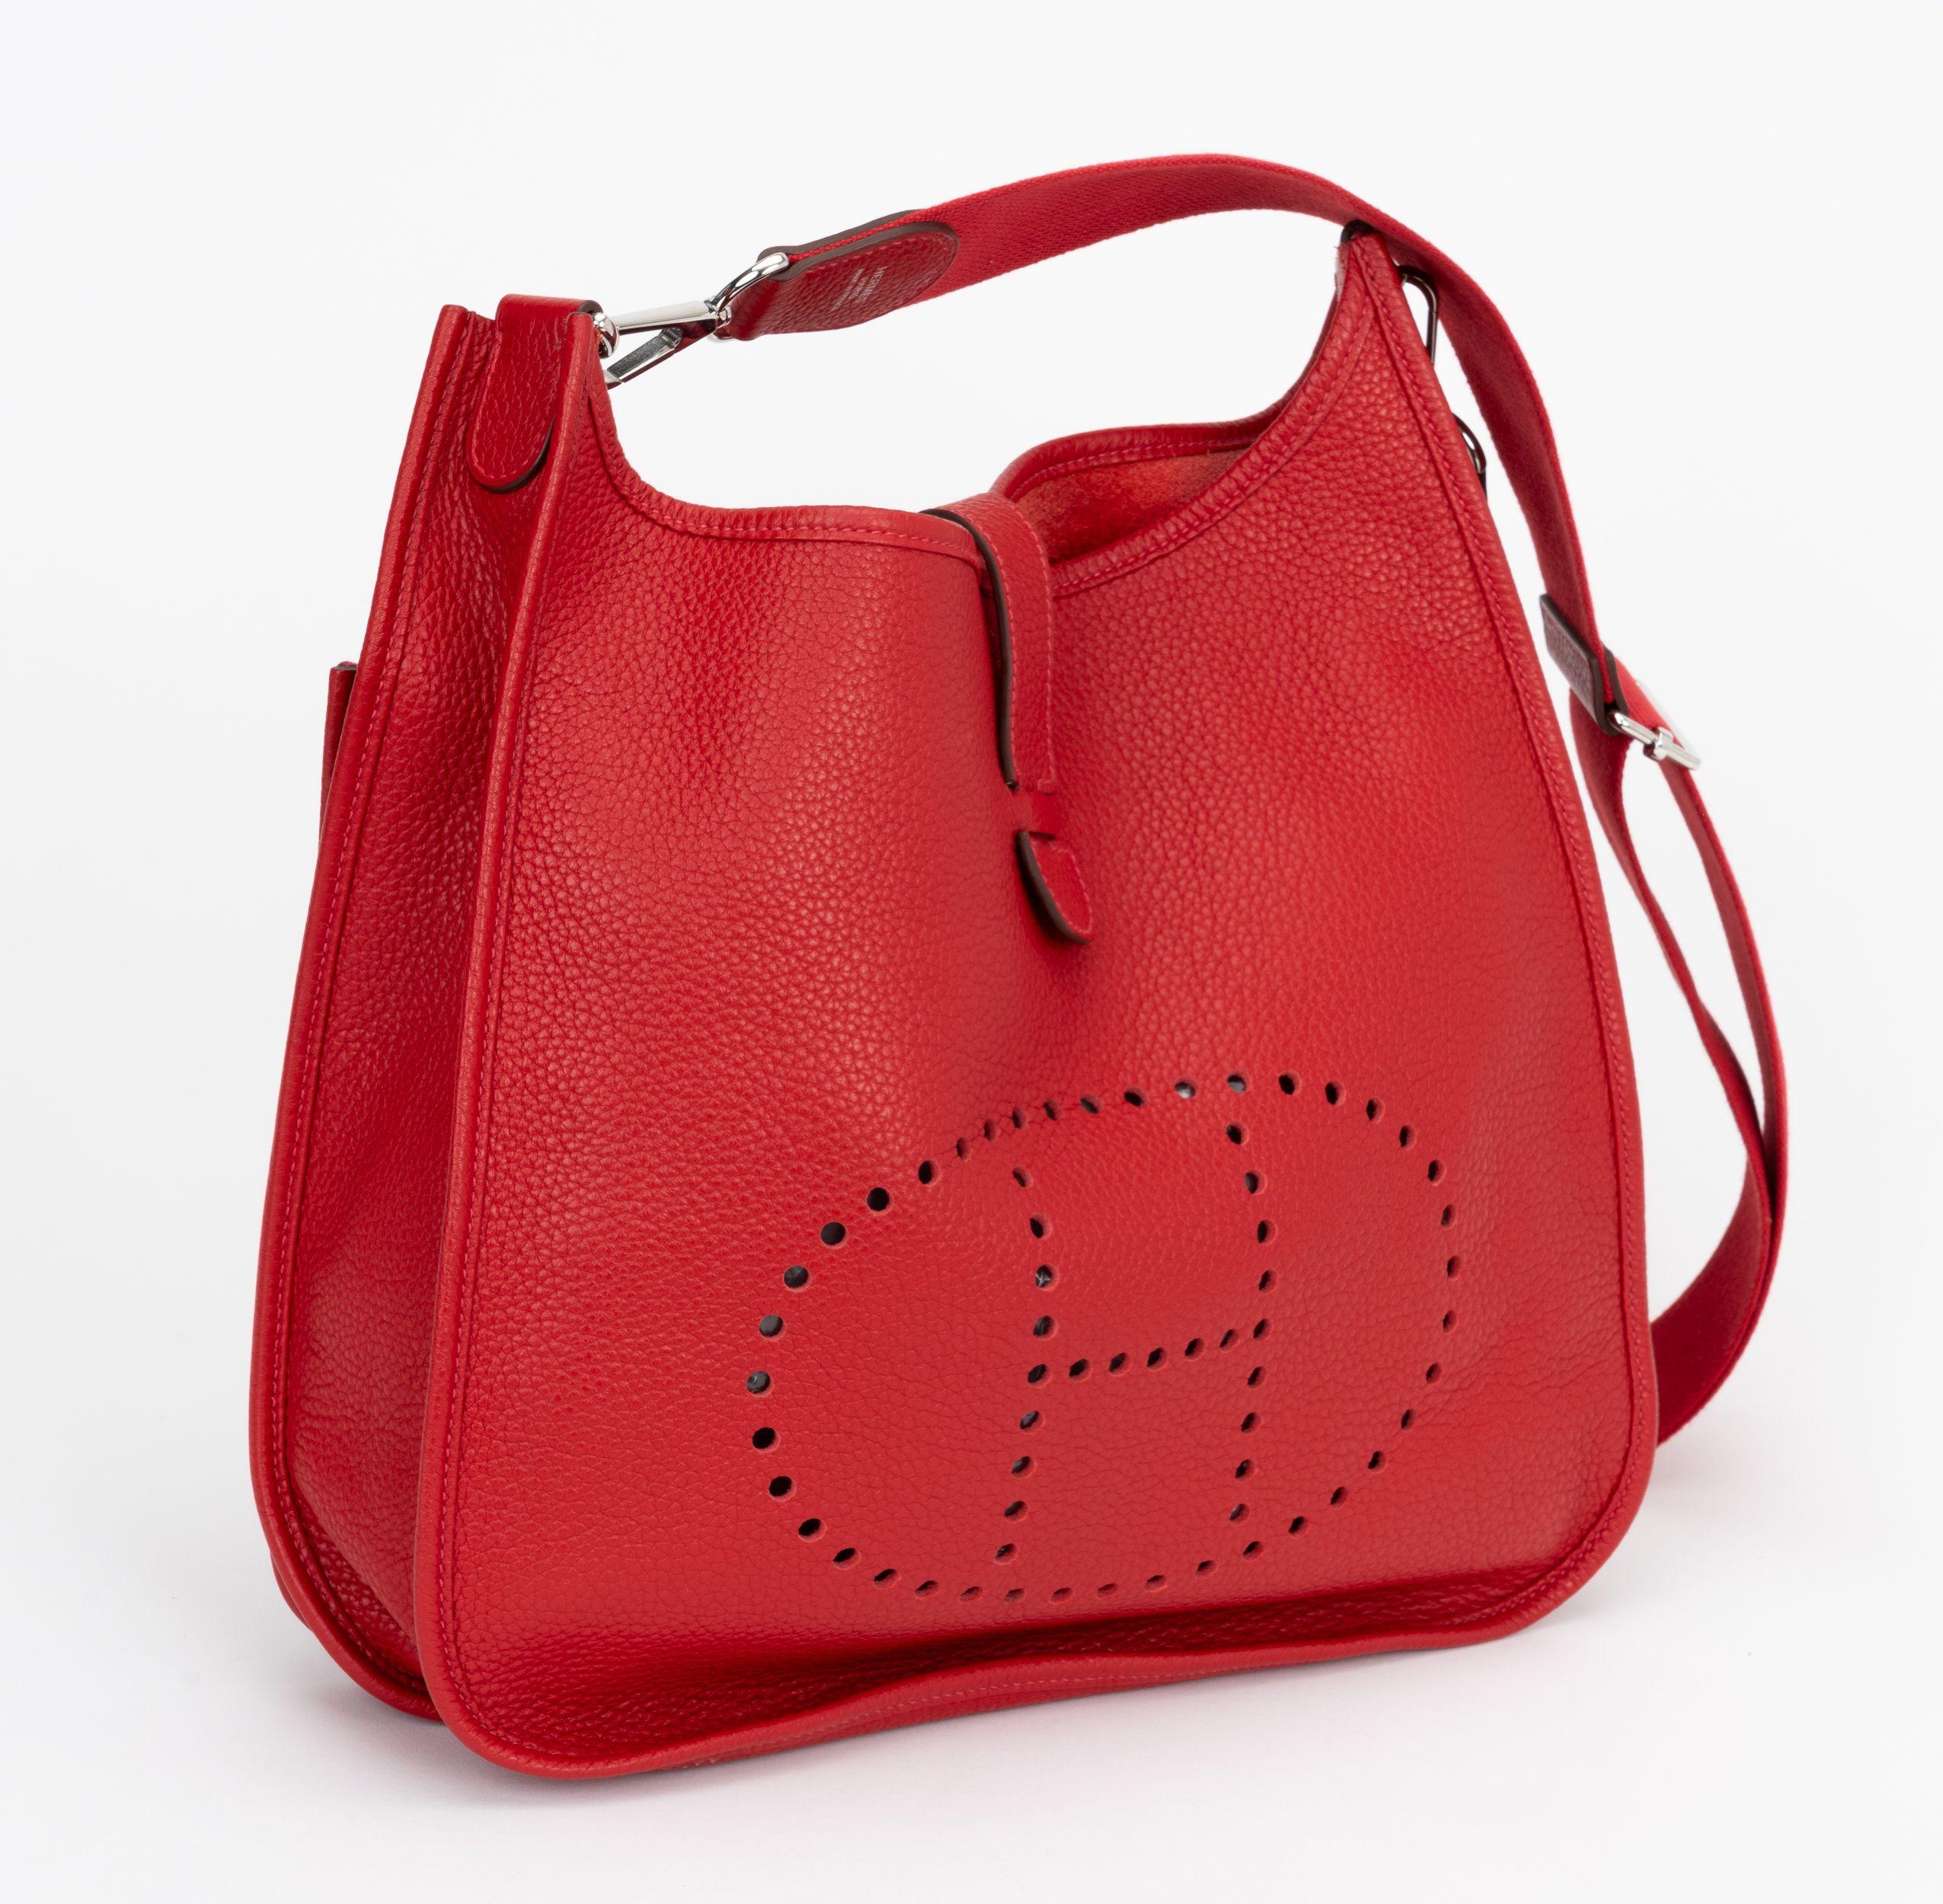 Hermès Evelyne GM in rouge casaque taurillon clemence leather and palladium hardware. Shoulder drop, 18